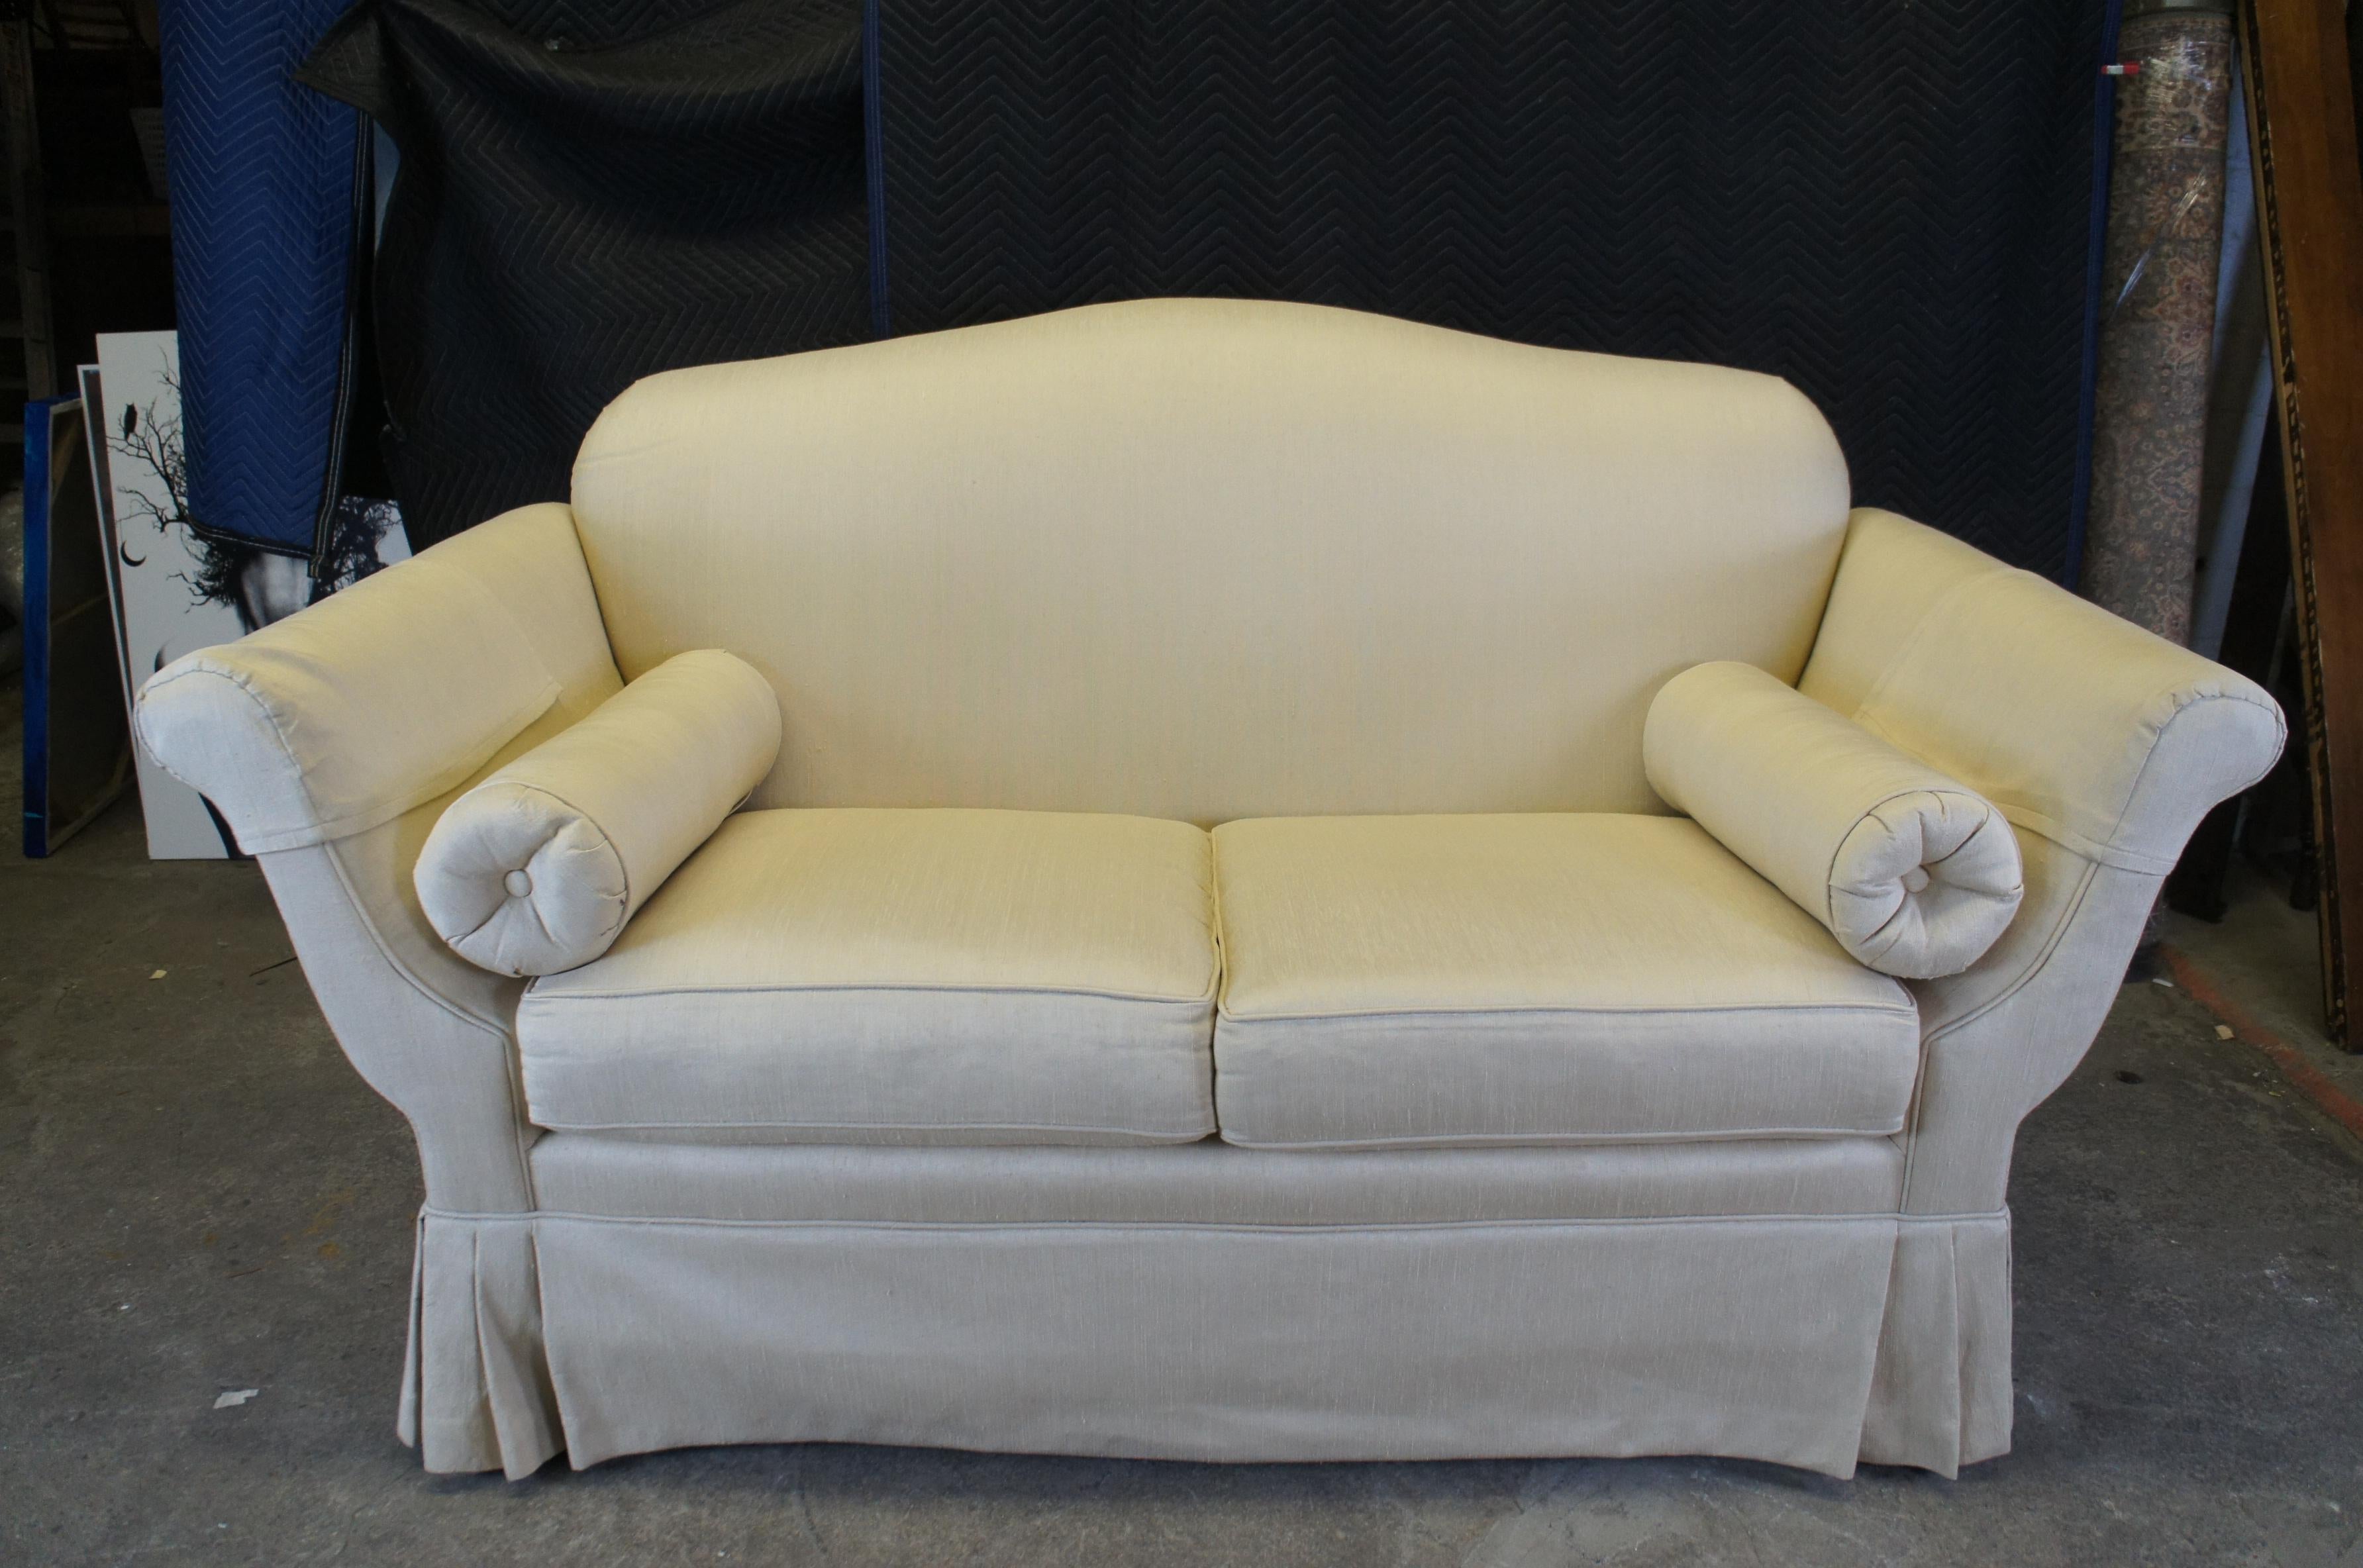 20th Century Vintage French Knole Style Silk Down Filled High Arm Loveseat Settee Sofa Couch For Sale